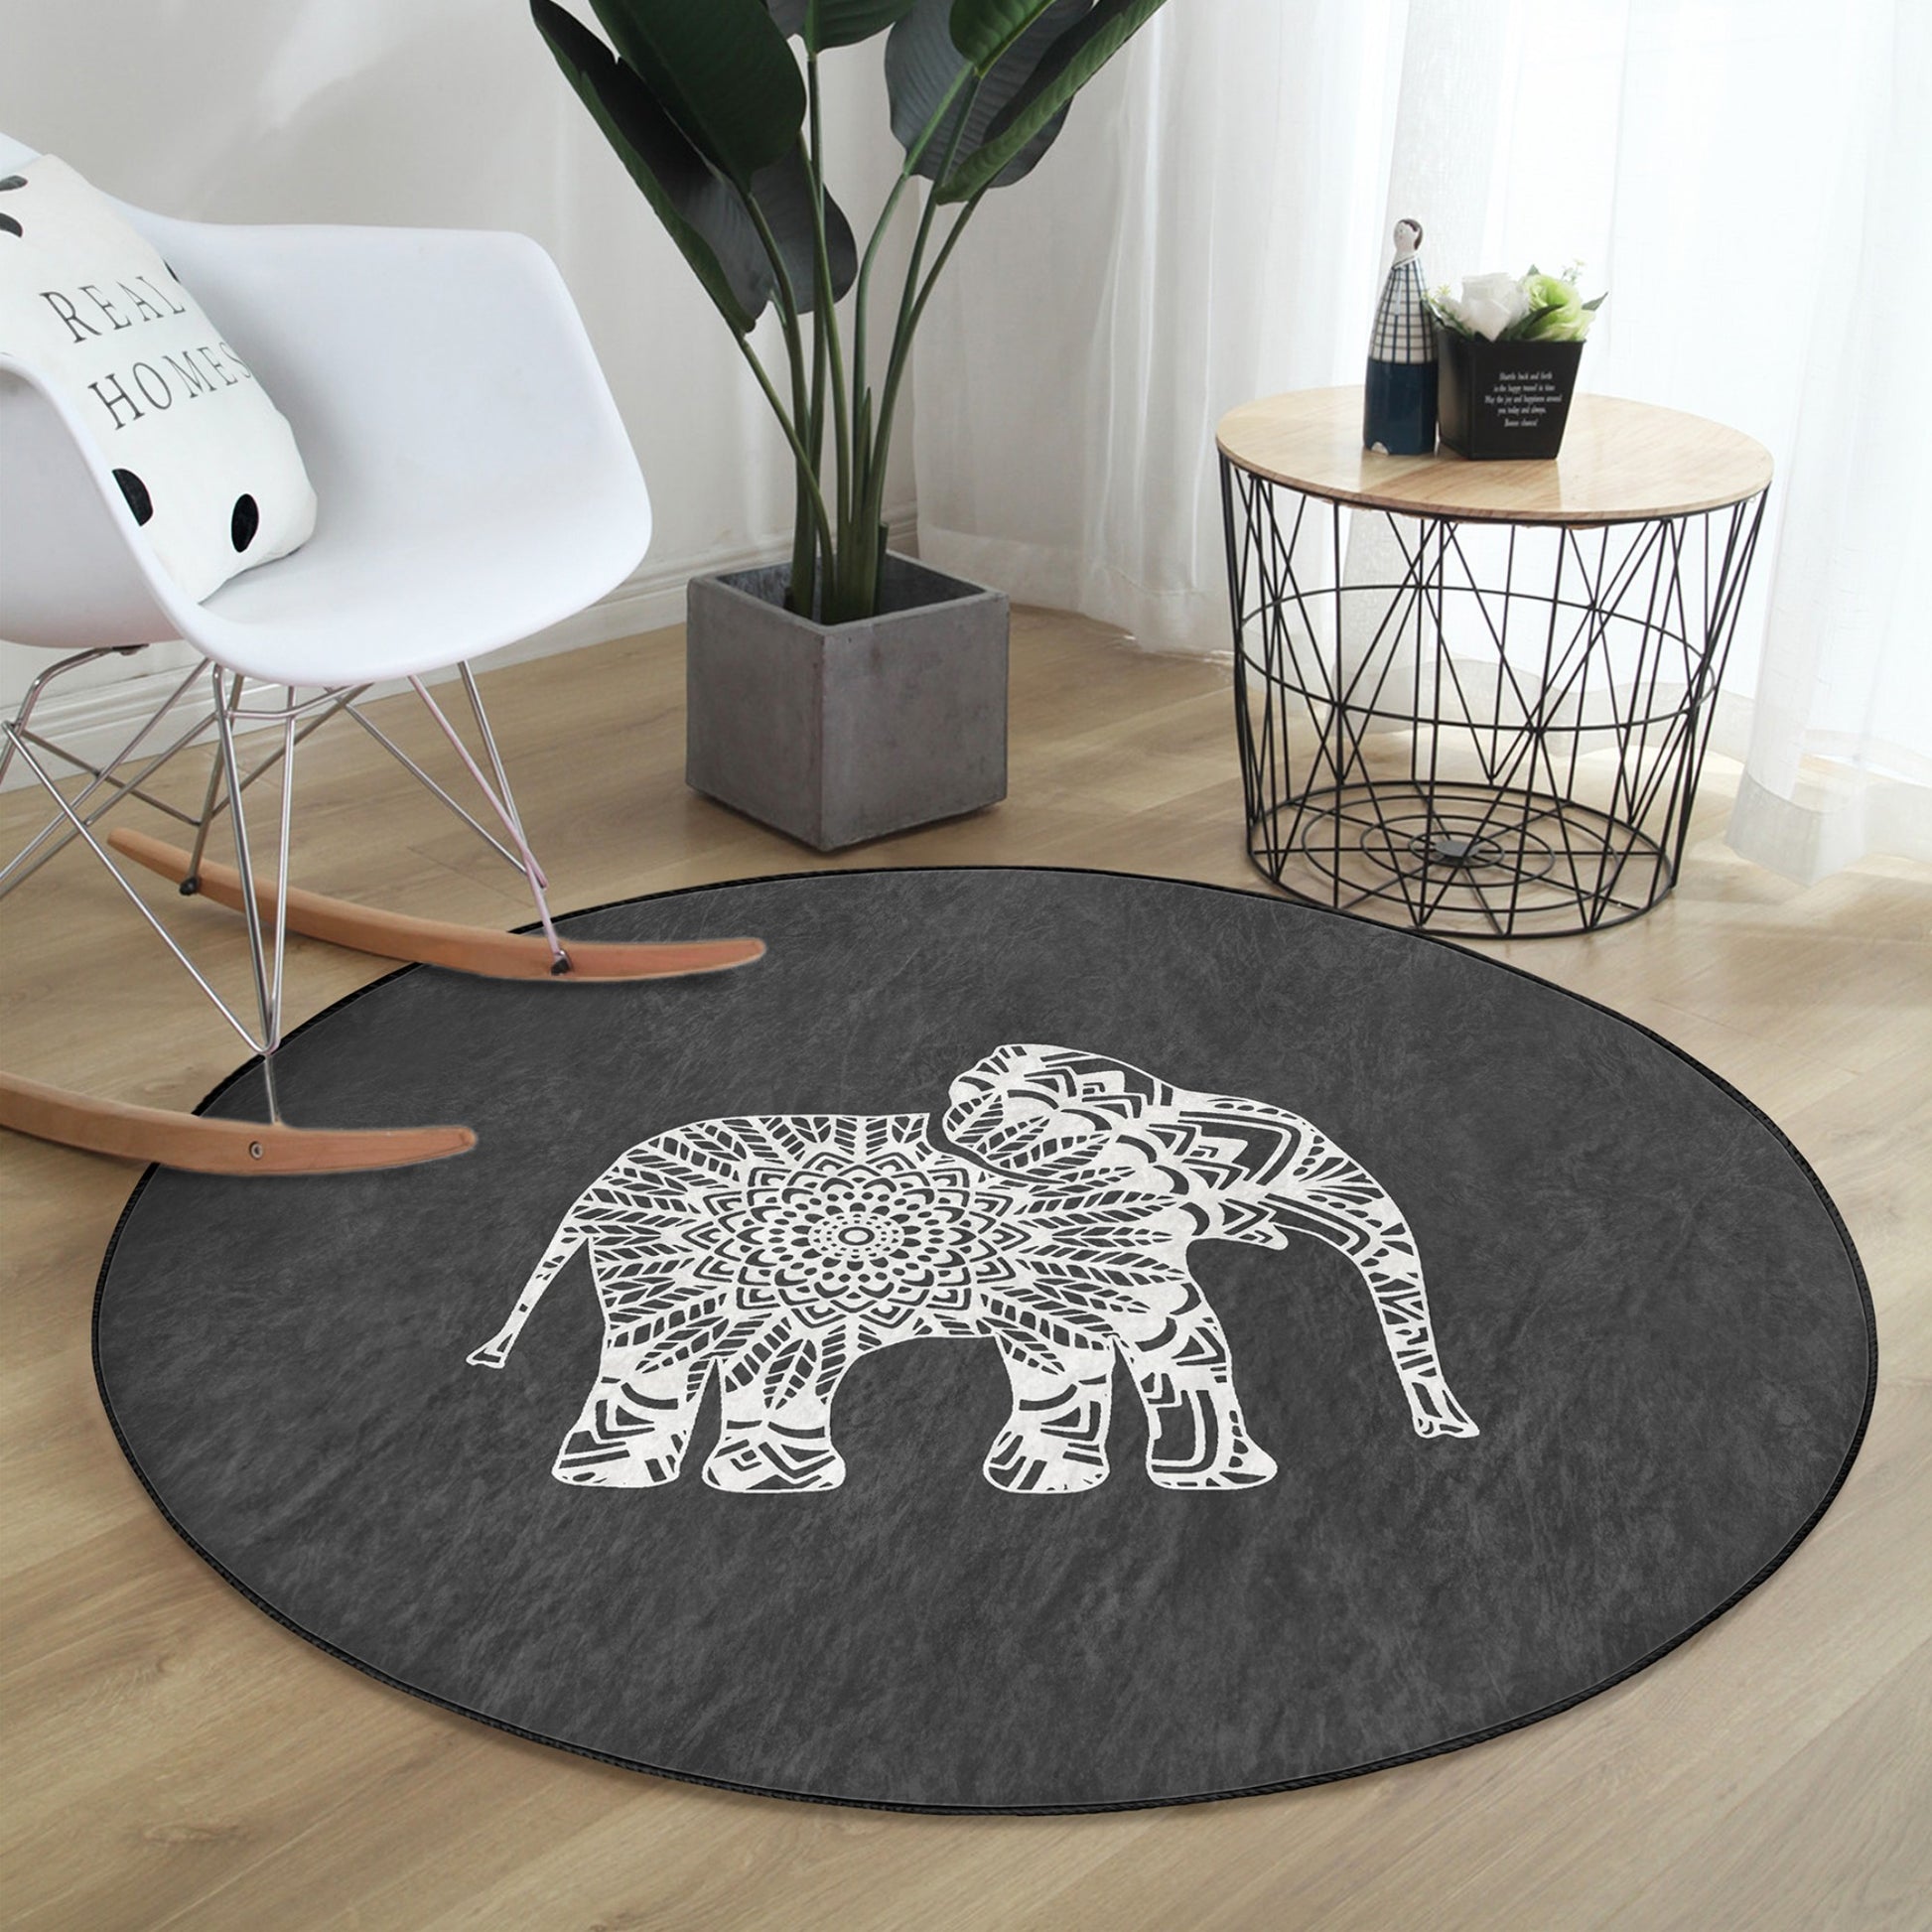 Round Patterned Floor Rug - Stylish Home Accent